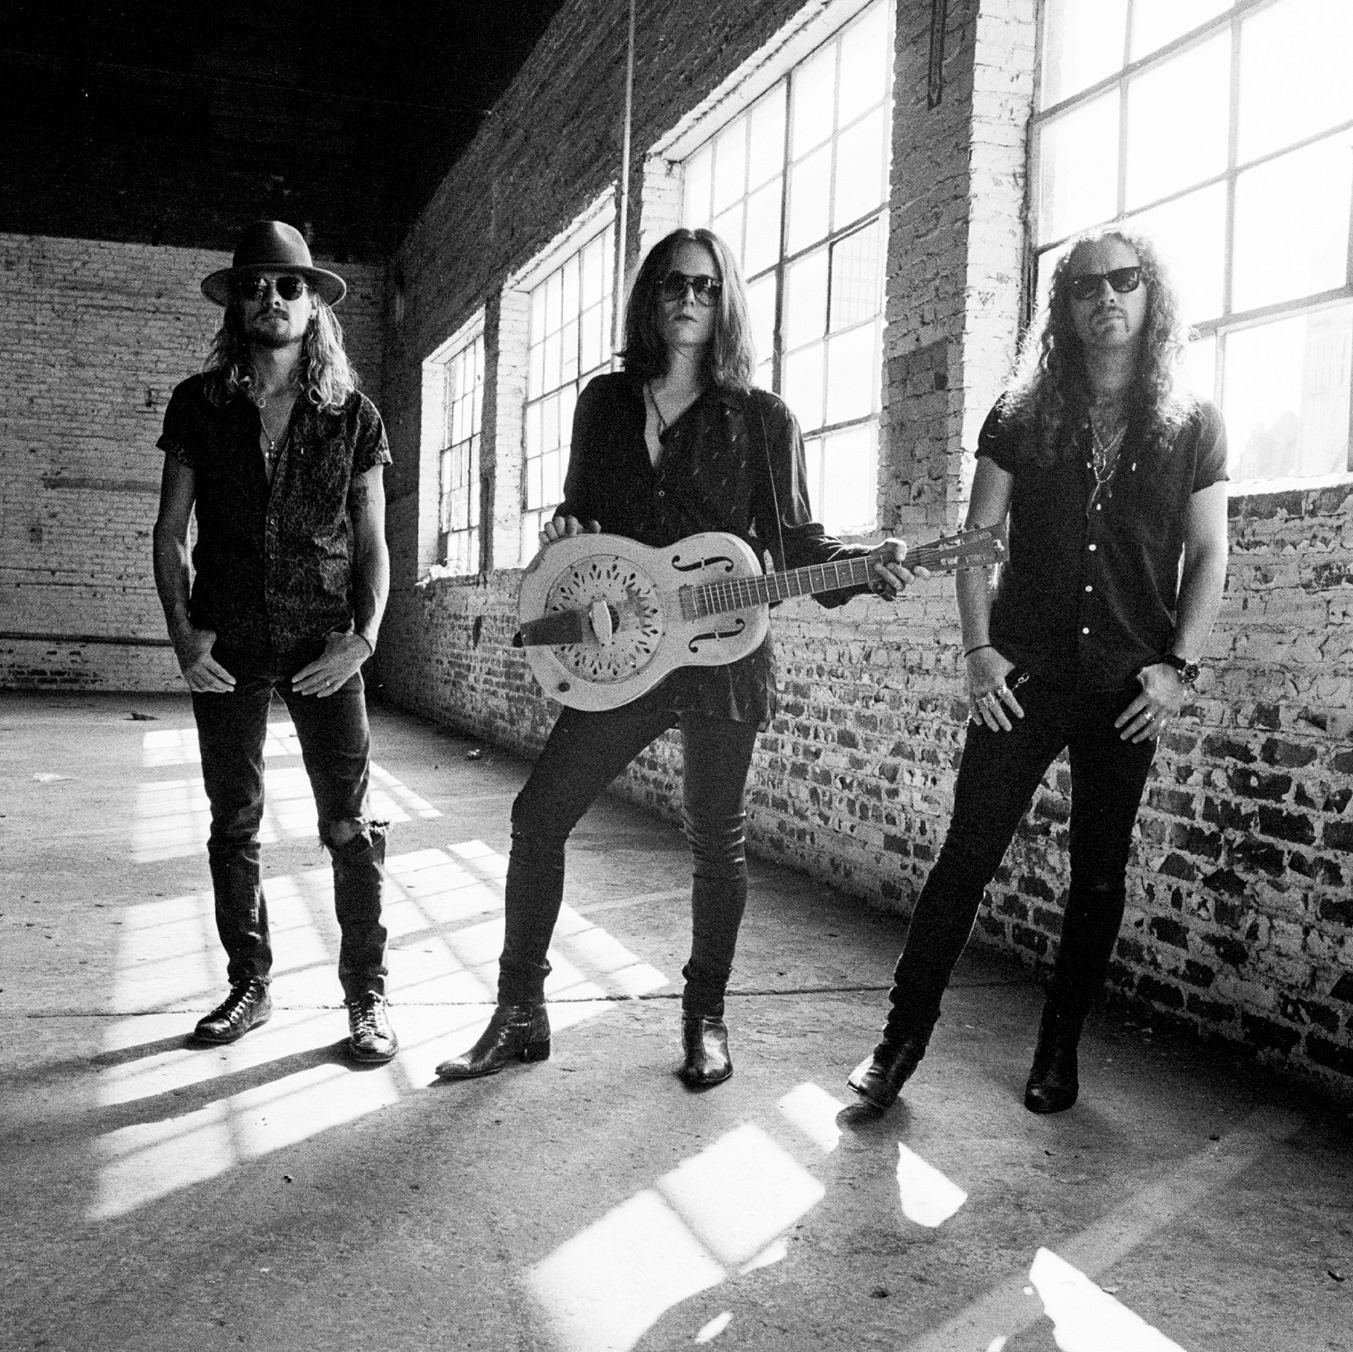 Tyler Bryant Applies ‘Pressure’ For Another Tough, Party-Ready Set Of Riffy Blues Rocking